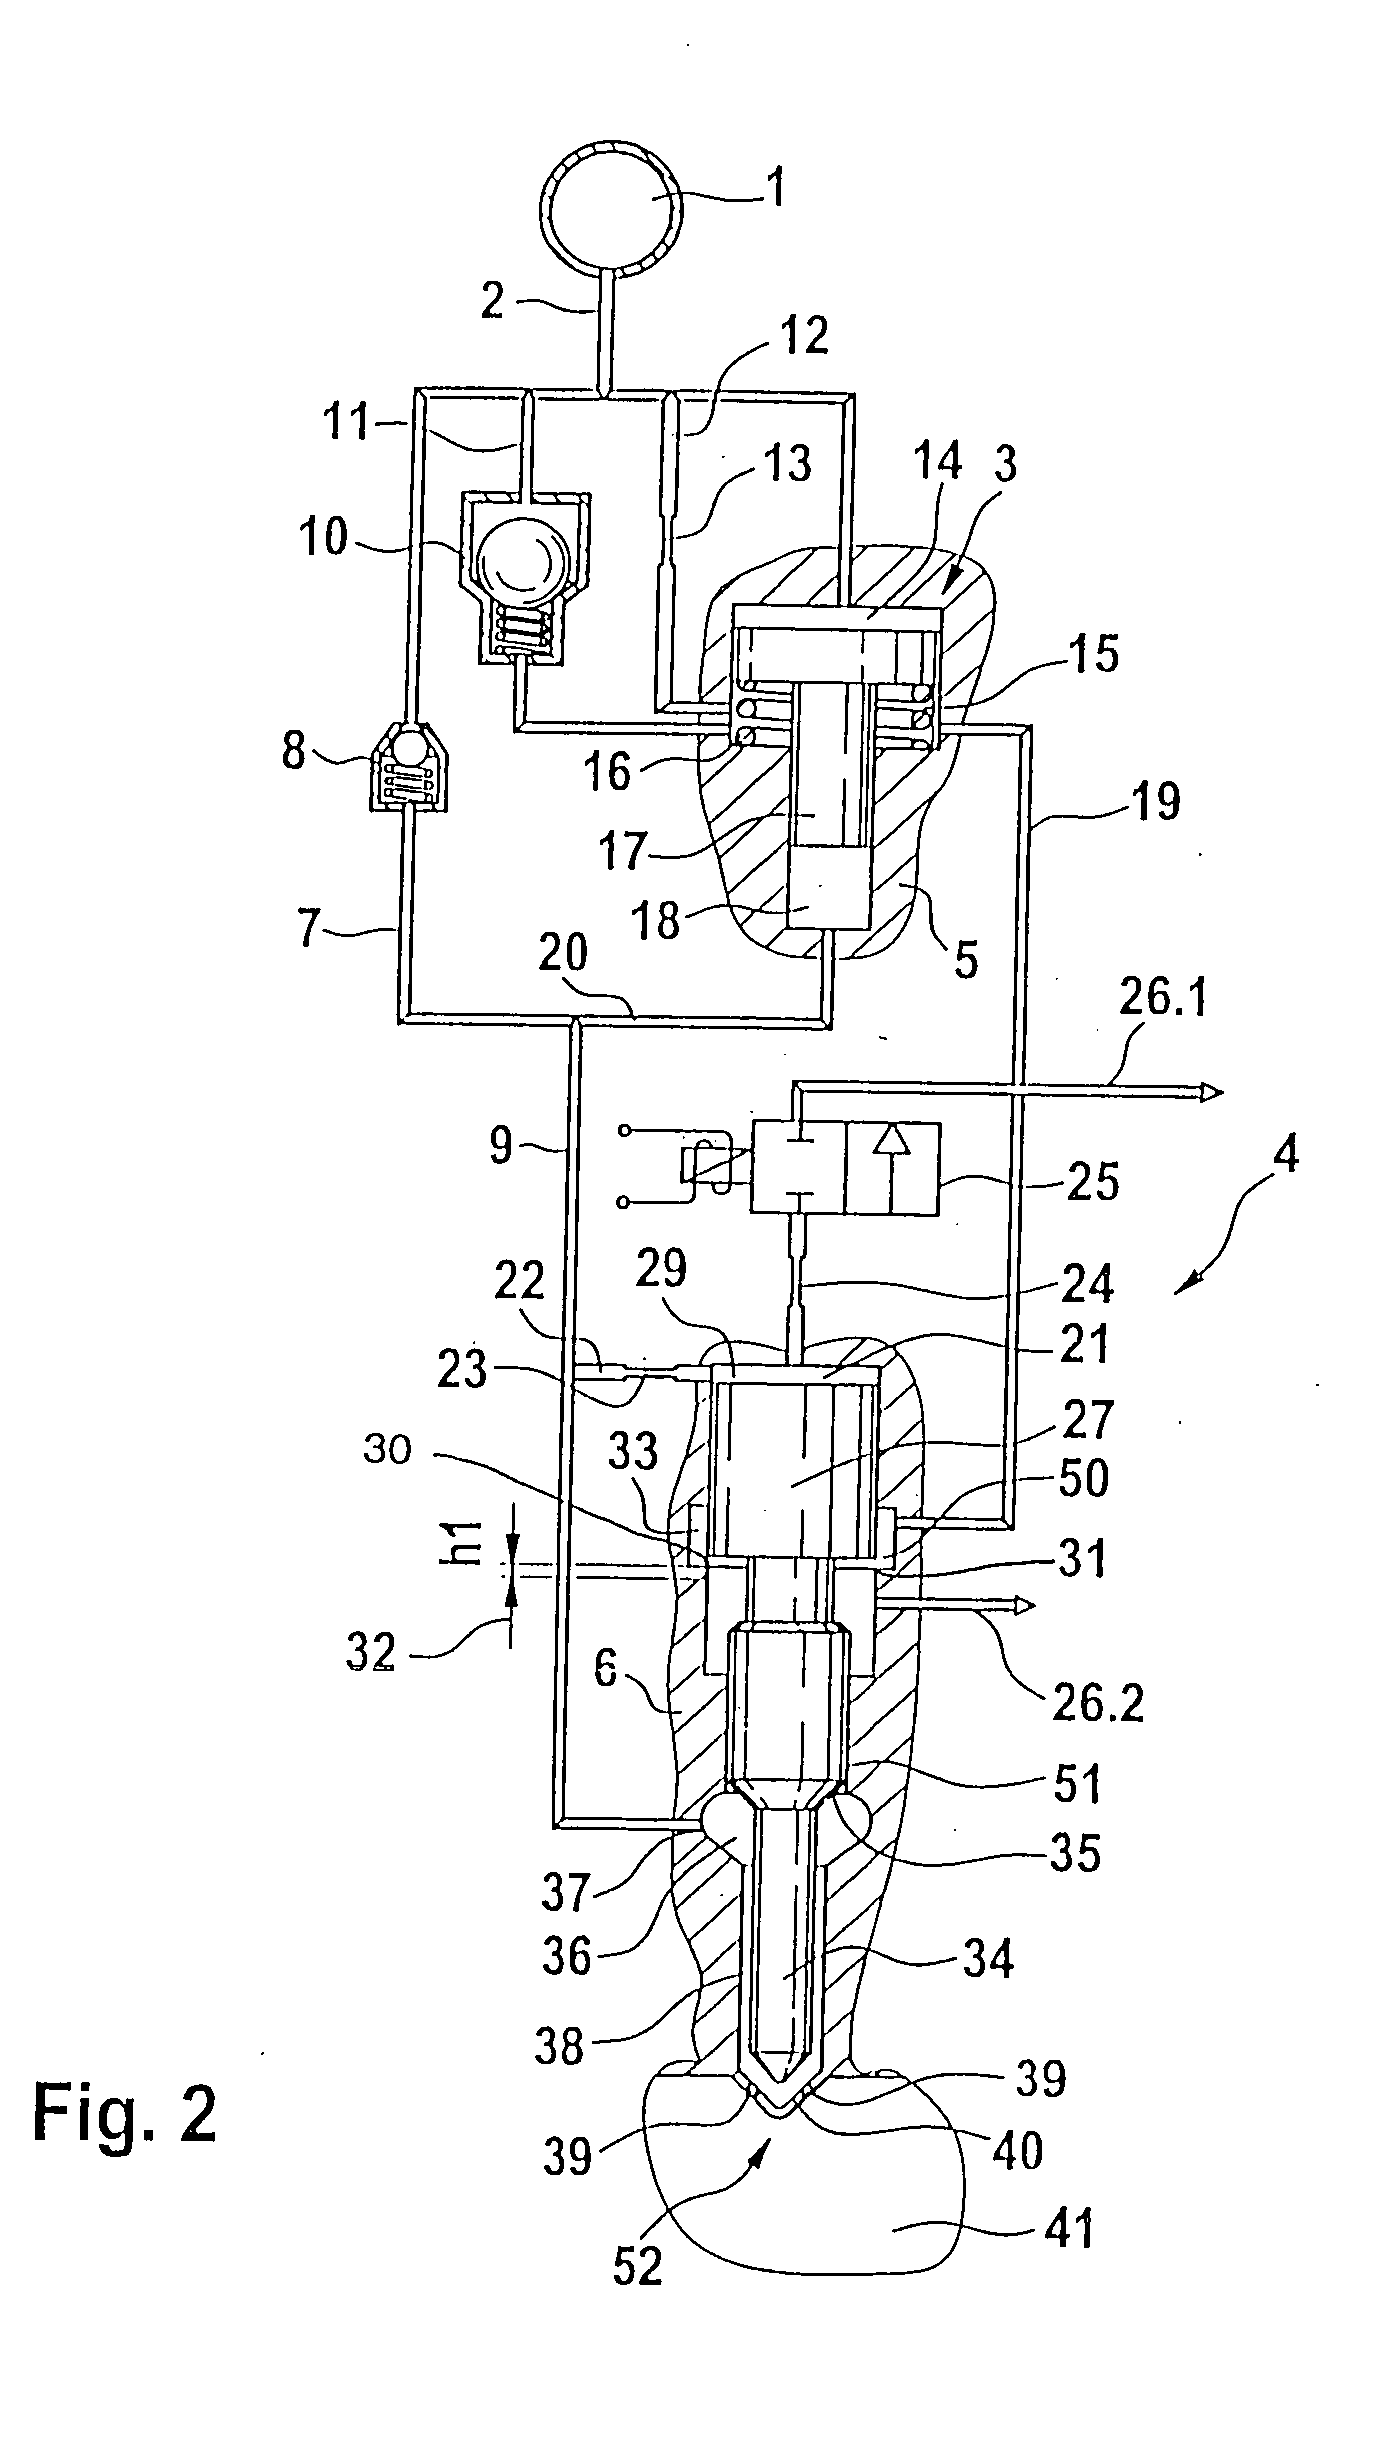 Control of a pressure exchanger by displacement of an injection valve member